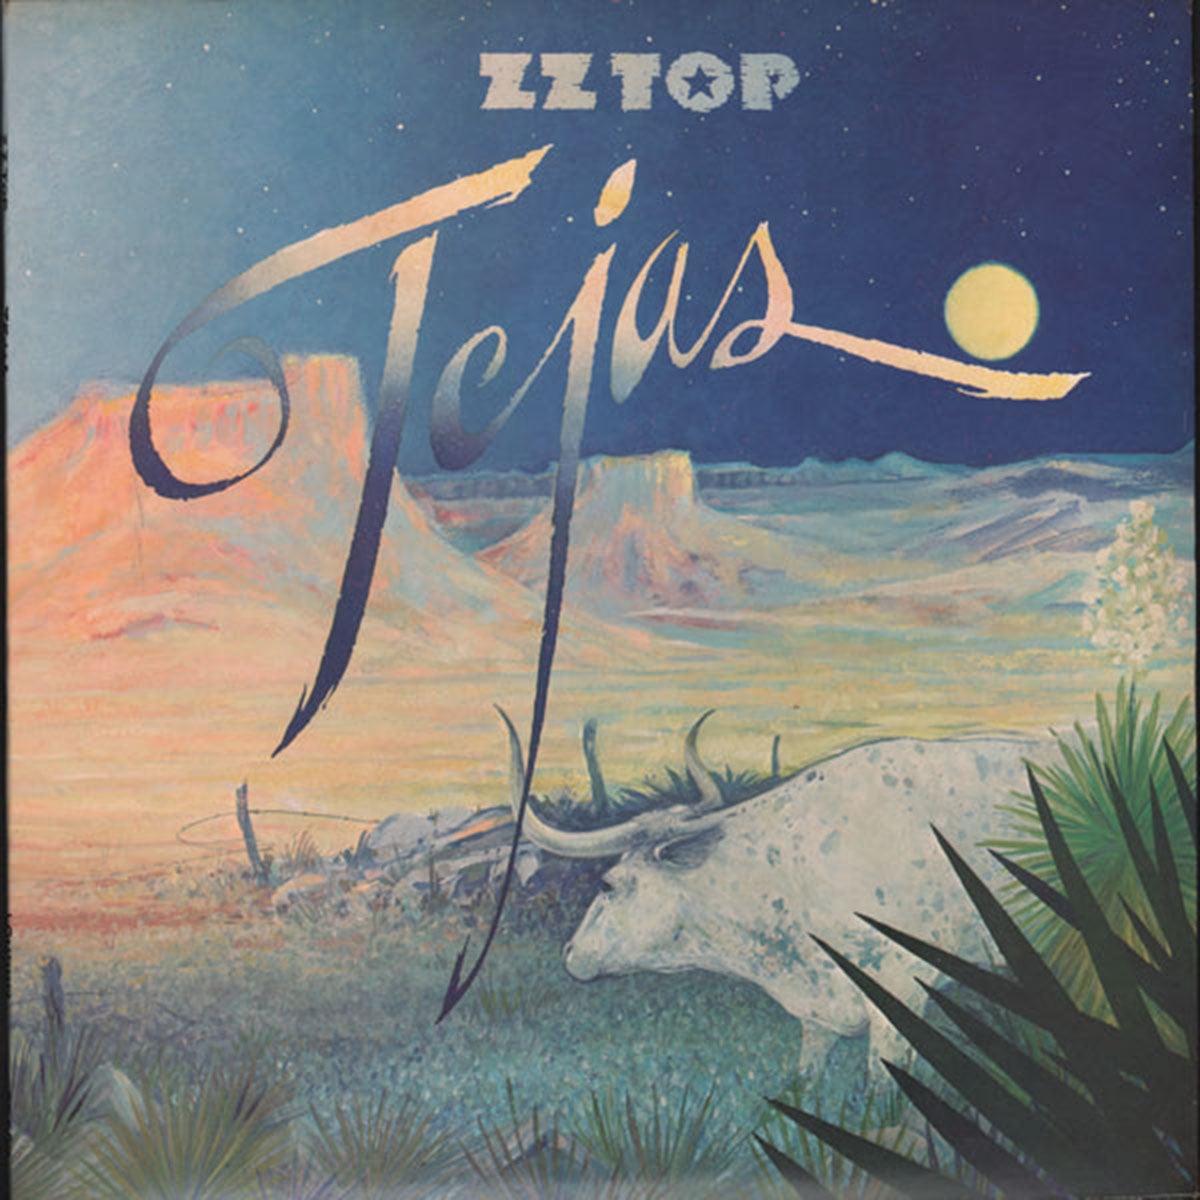 ZZ Top – Tejas - Trifold Cover! 1976 Pressing!